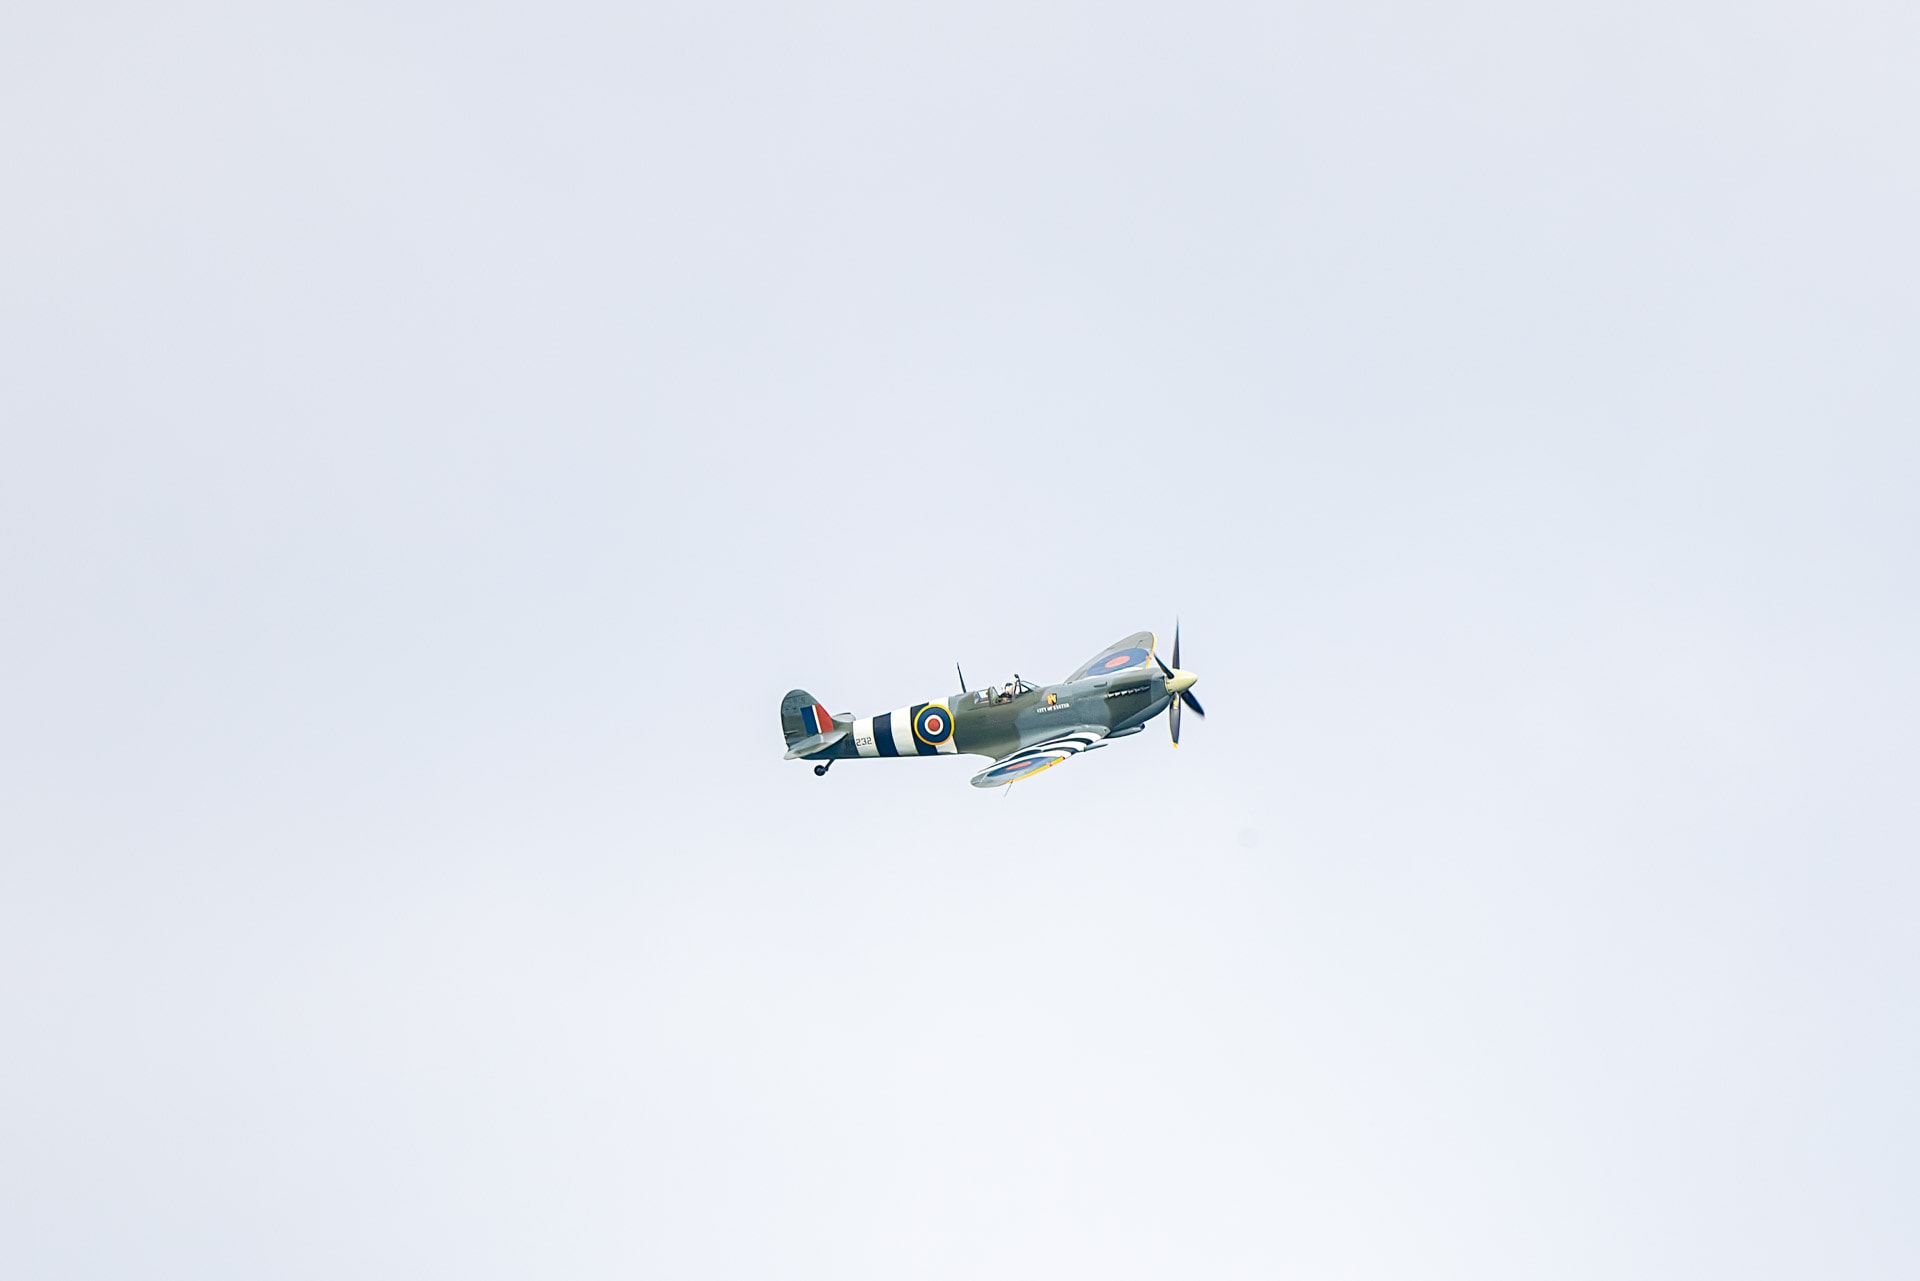 spitfire flyby at wedding